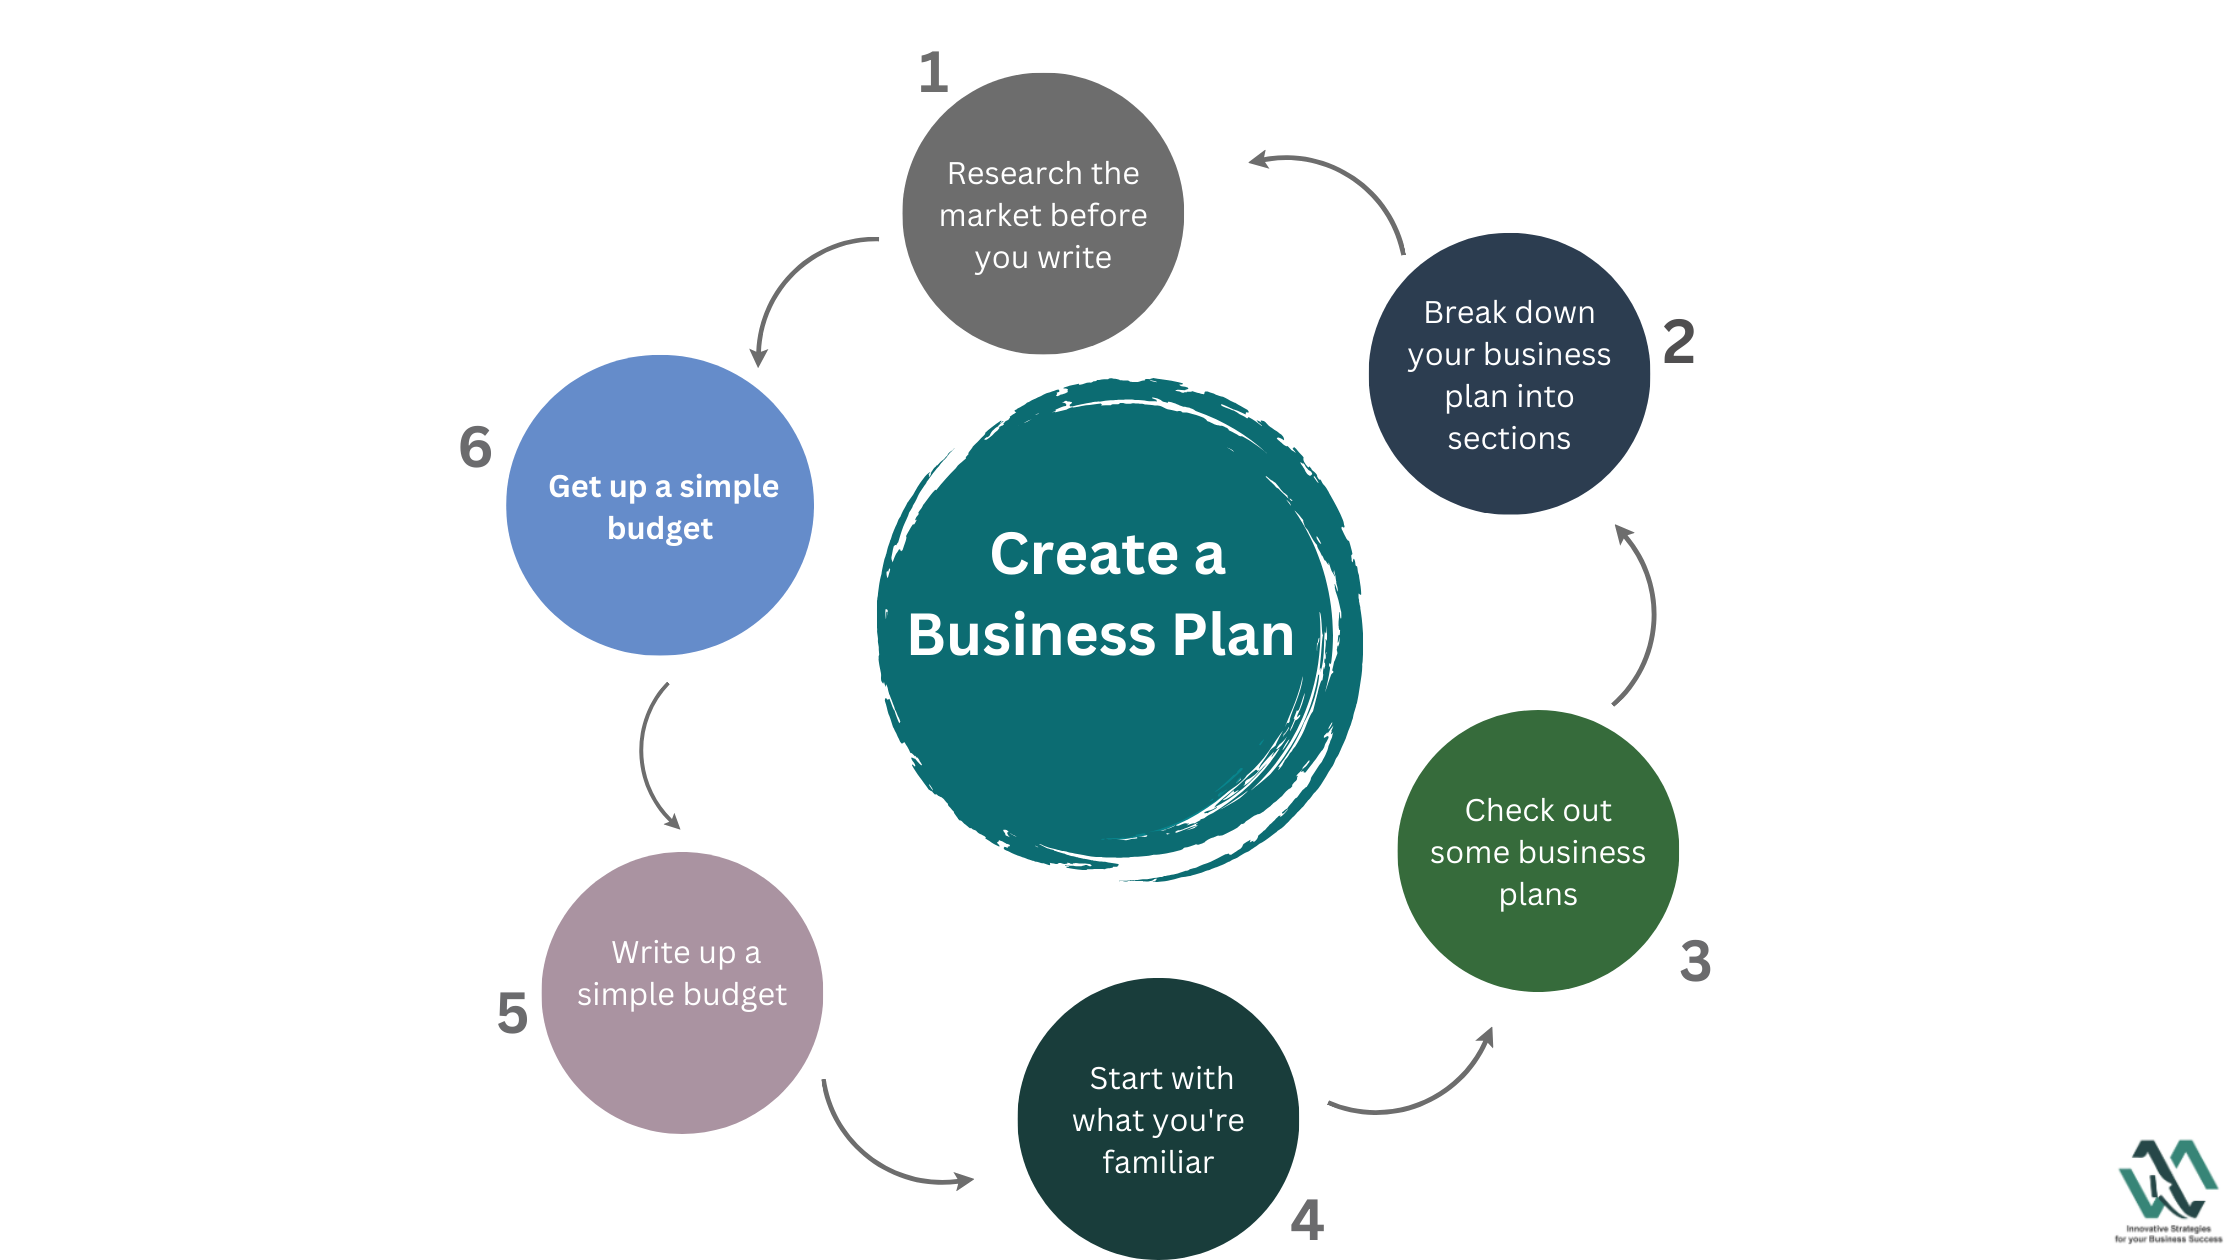 In one day, create a business plan